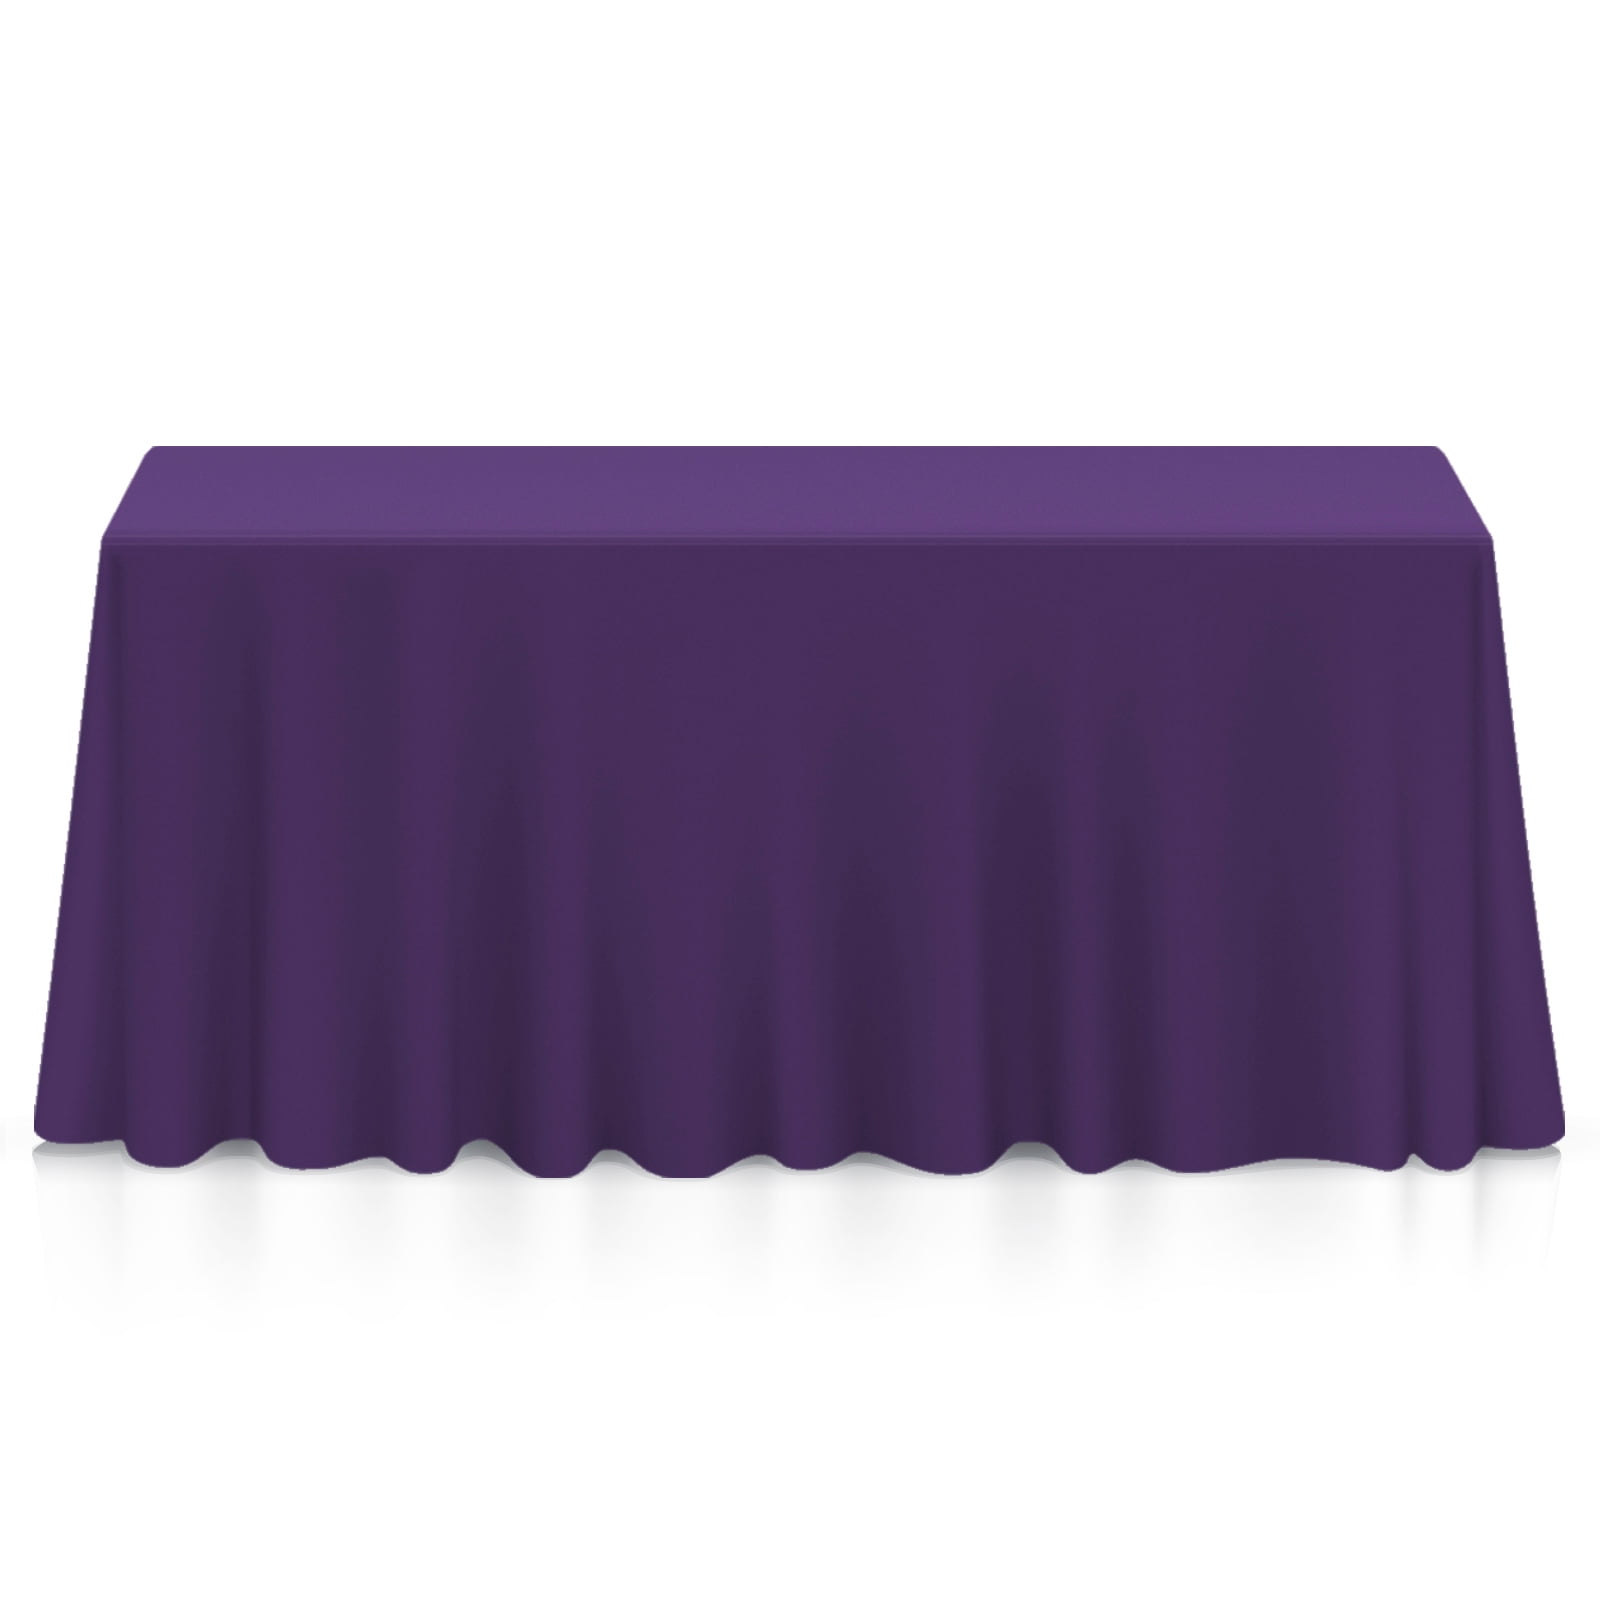 Satin Seamless Rectangle Tablecloth Wedding Party Banquet Restaurant 90x132 in 